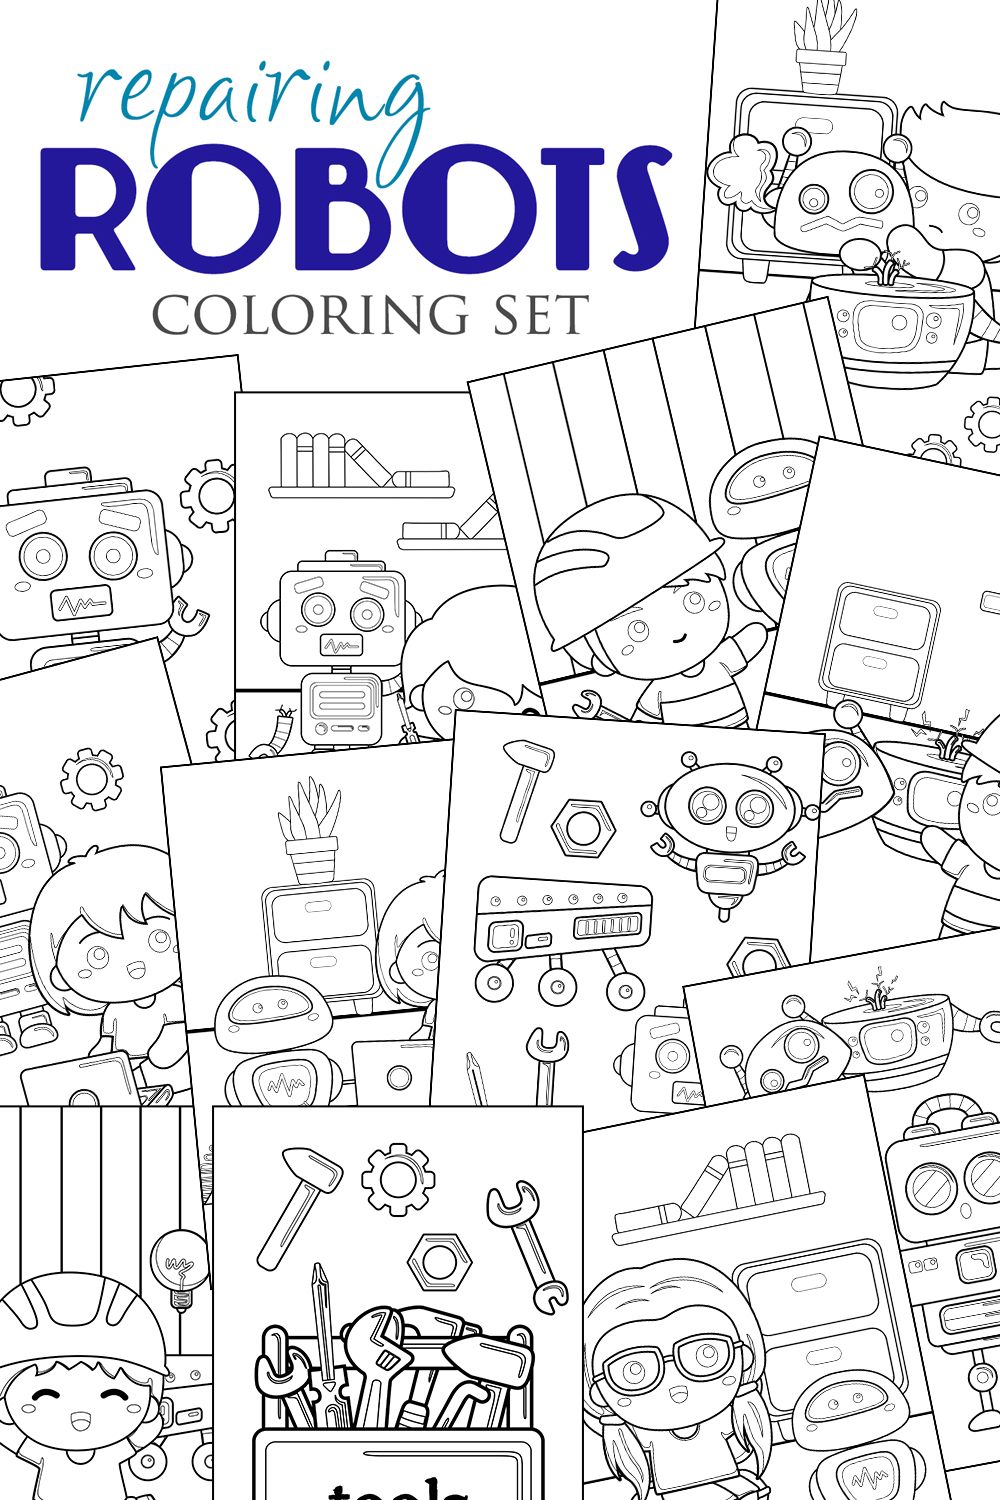 Kids Repair Robot Engineer Coloring Pages Activity For Kids And Adult pinterest preview image.